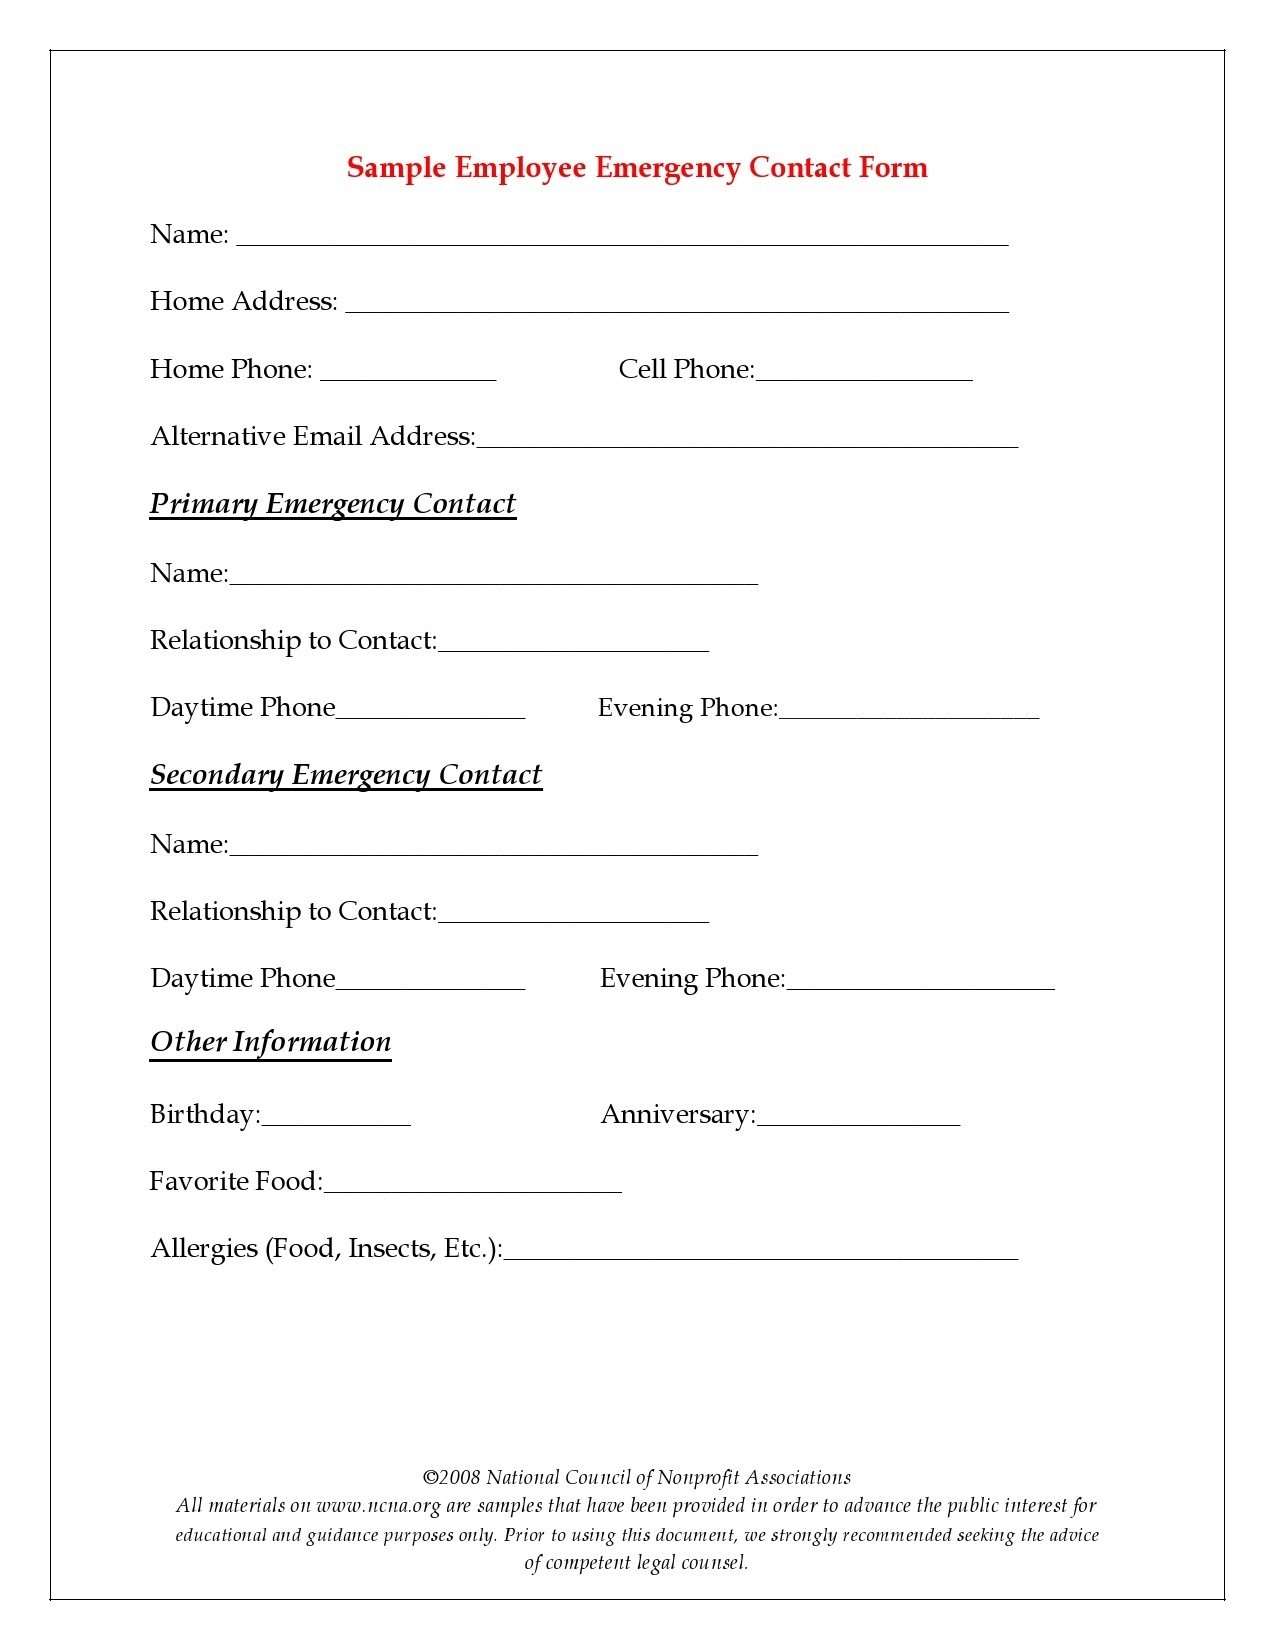 Free emergency contact form 02